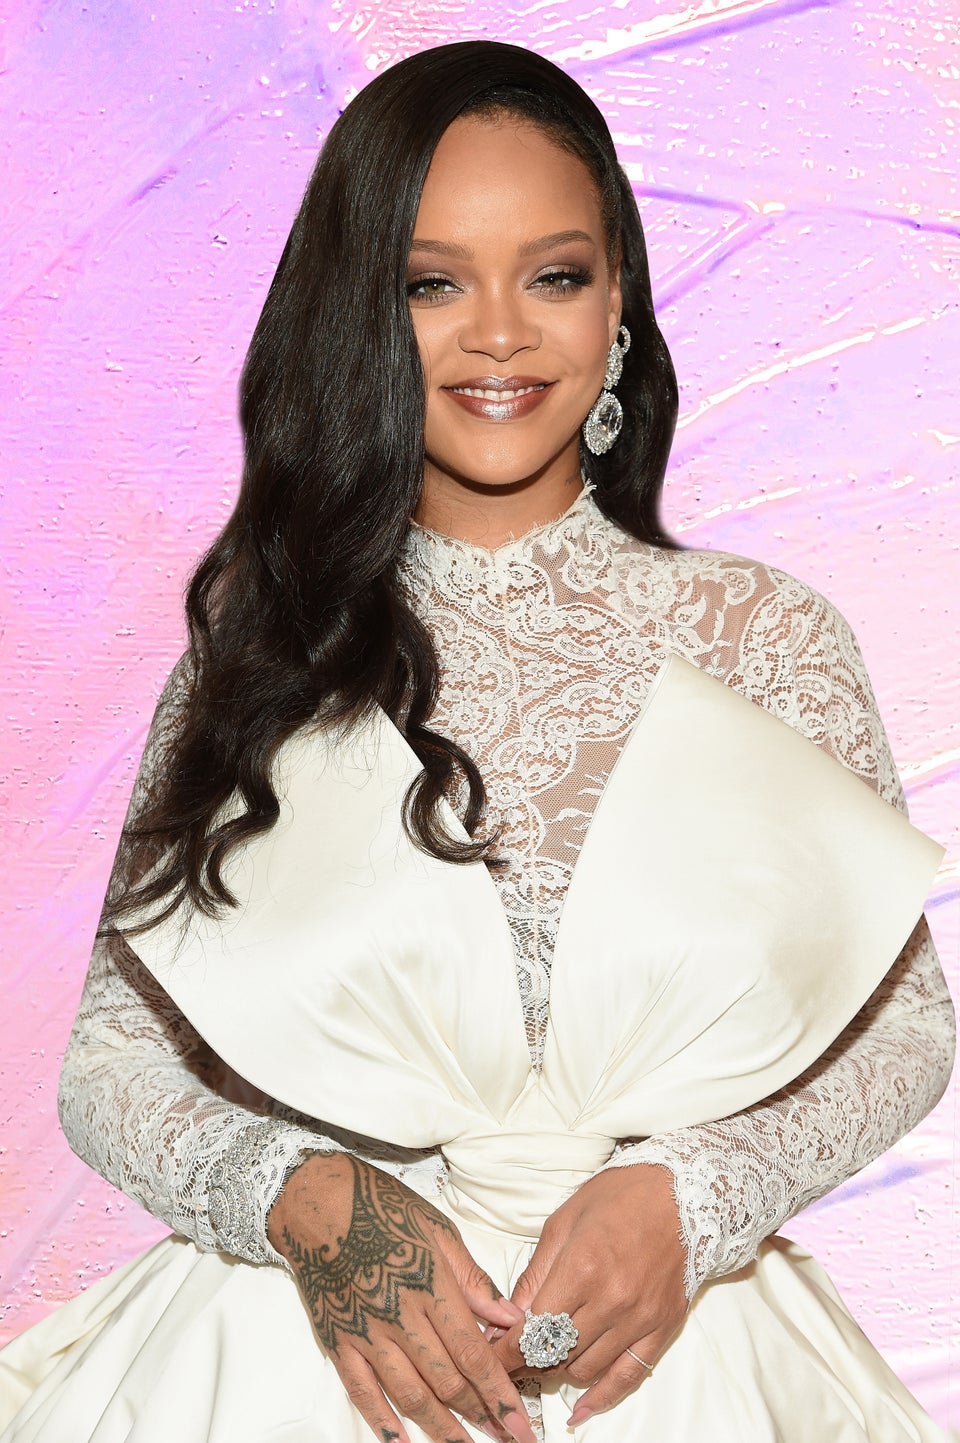 The Advice Rihanna Has For Her Younger Self Is Something We All Could Use